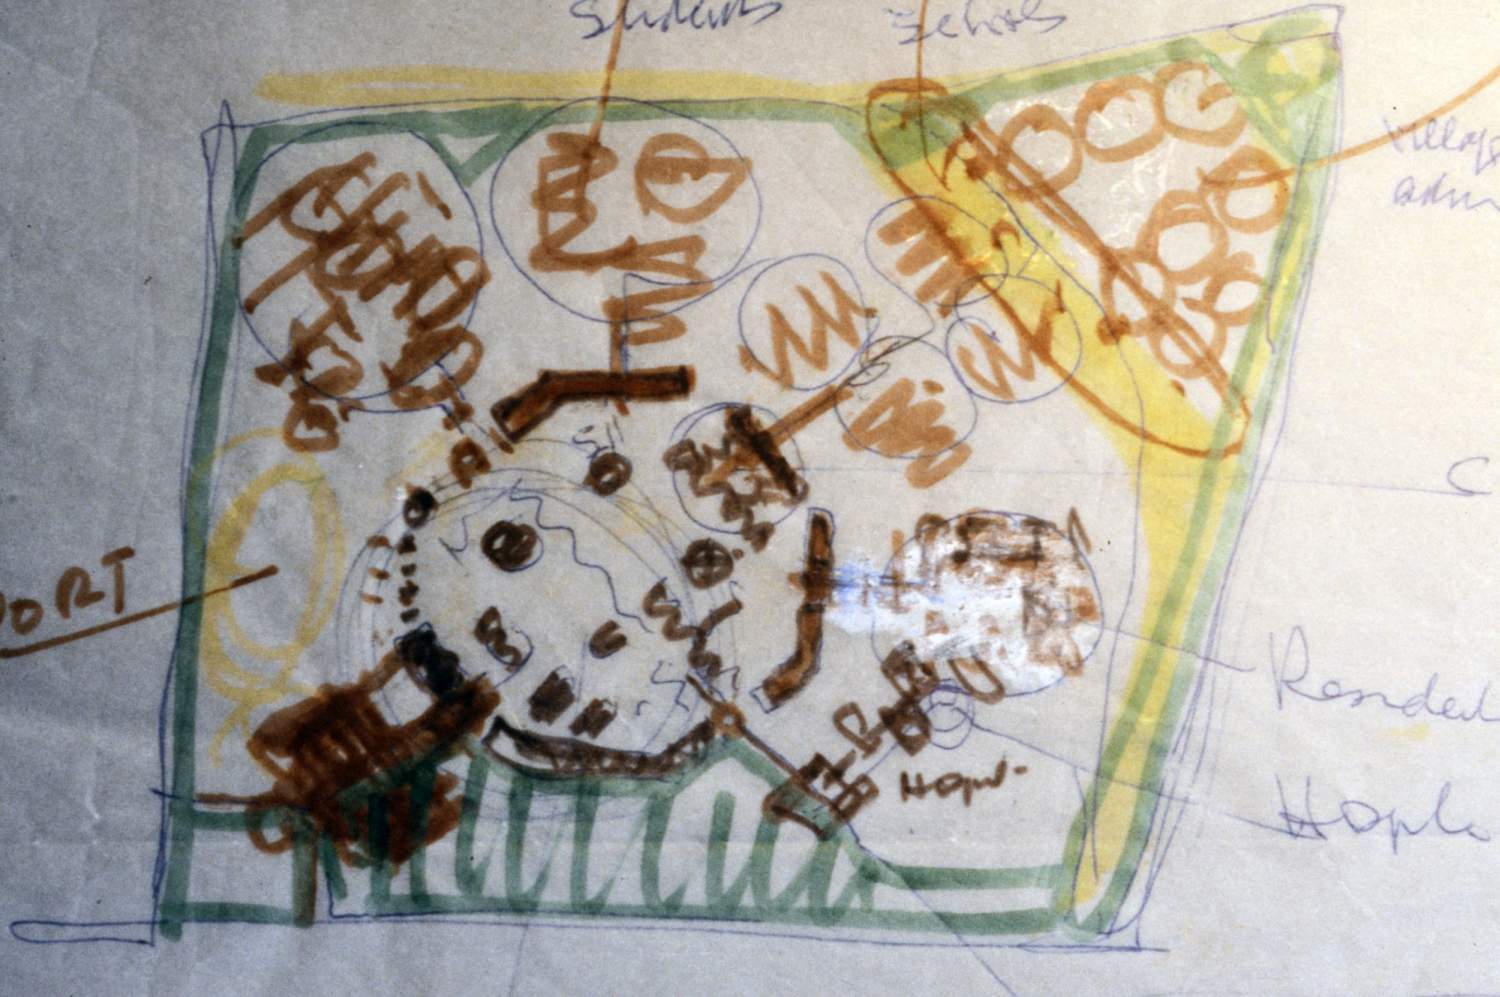 One of several preliminary sketches showing site plan for the university campus, annotated.